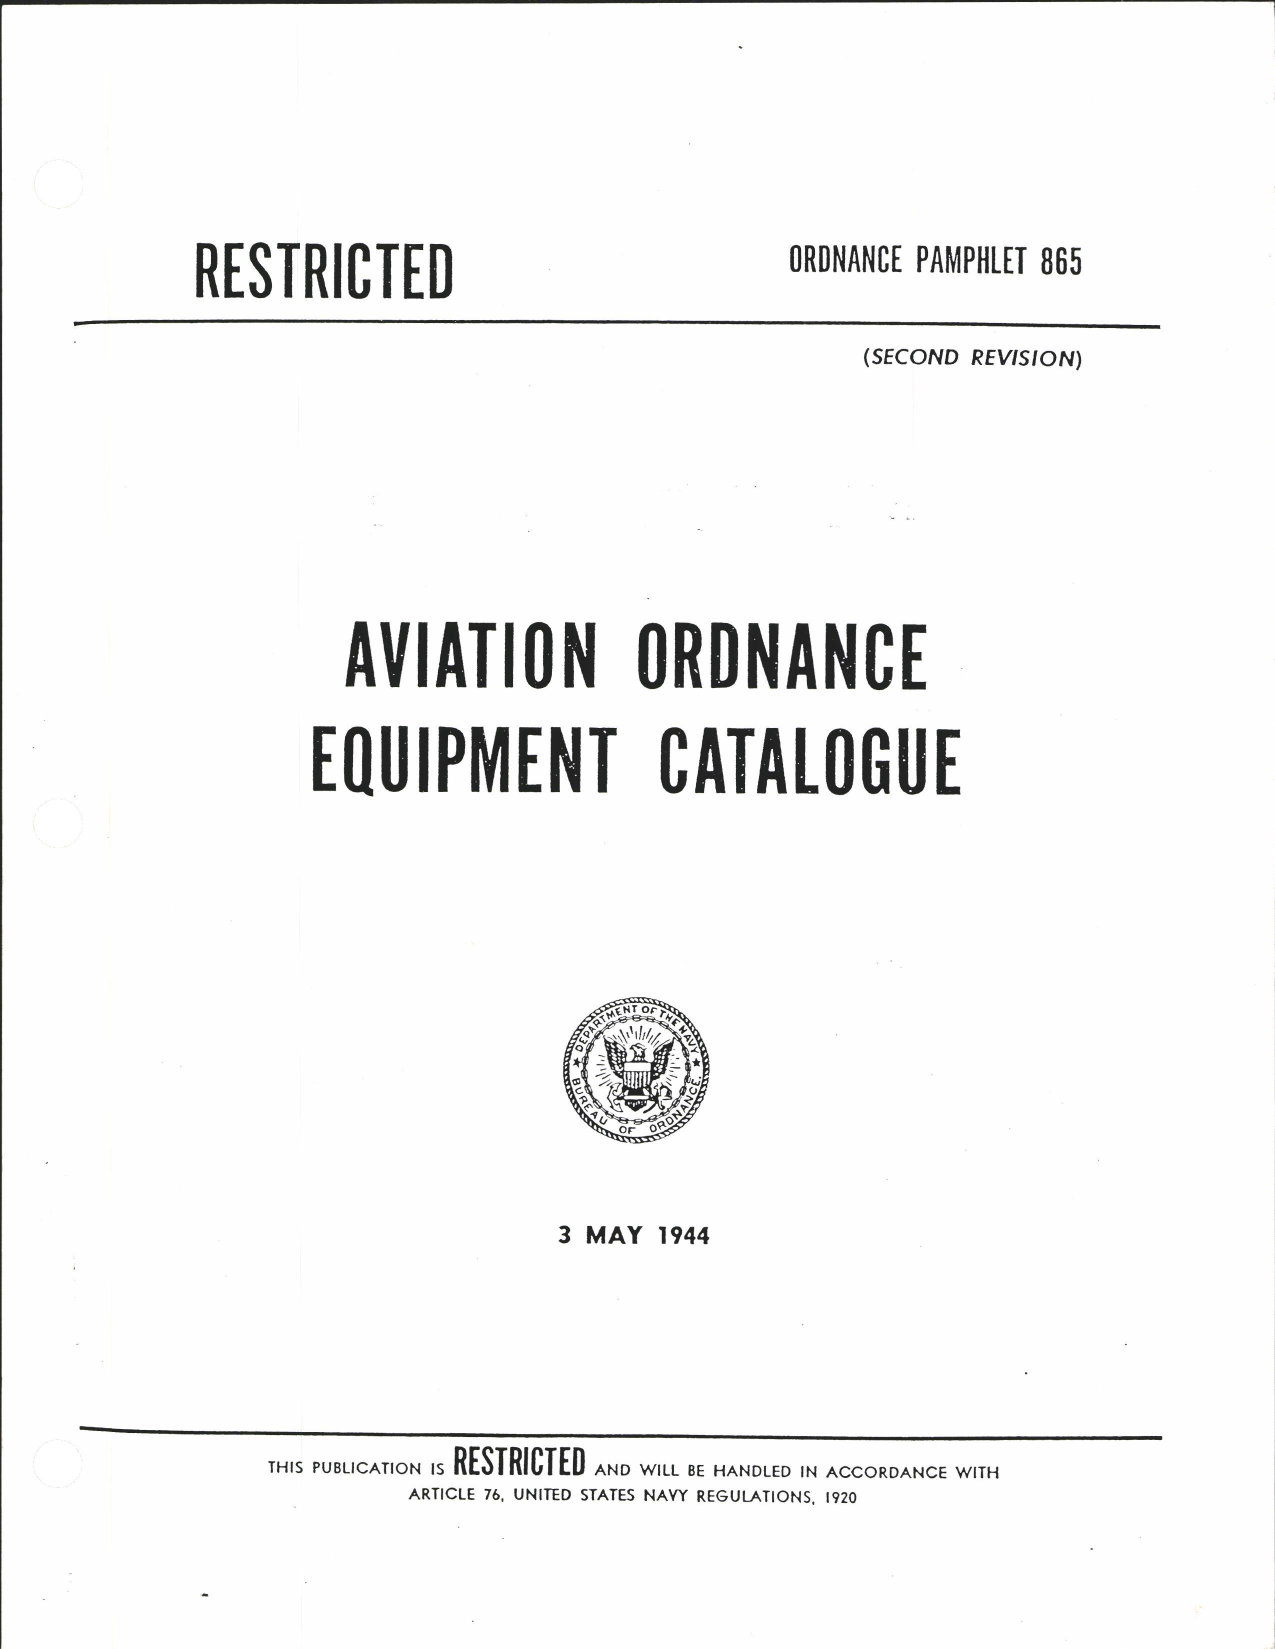 Sample page 1 from AirCorps Library document: Aviation Ordnance Equipment Catalogue for Aircraft Guns and Accessories